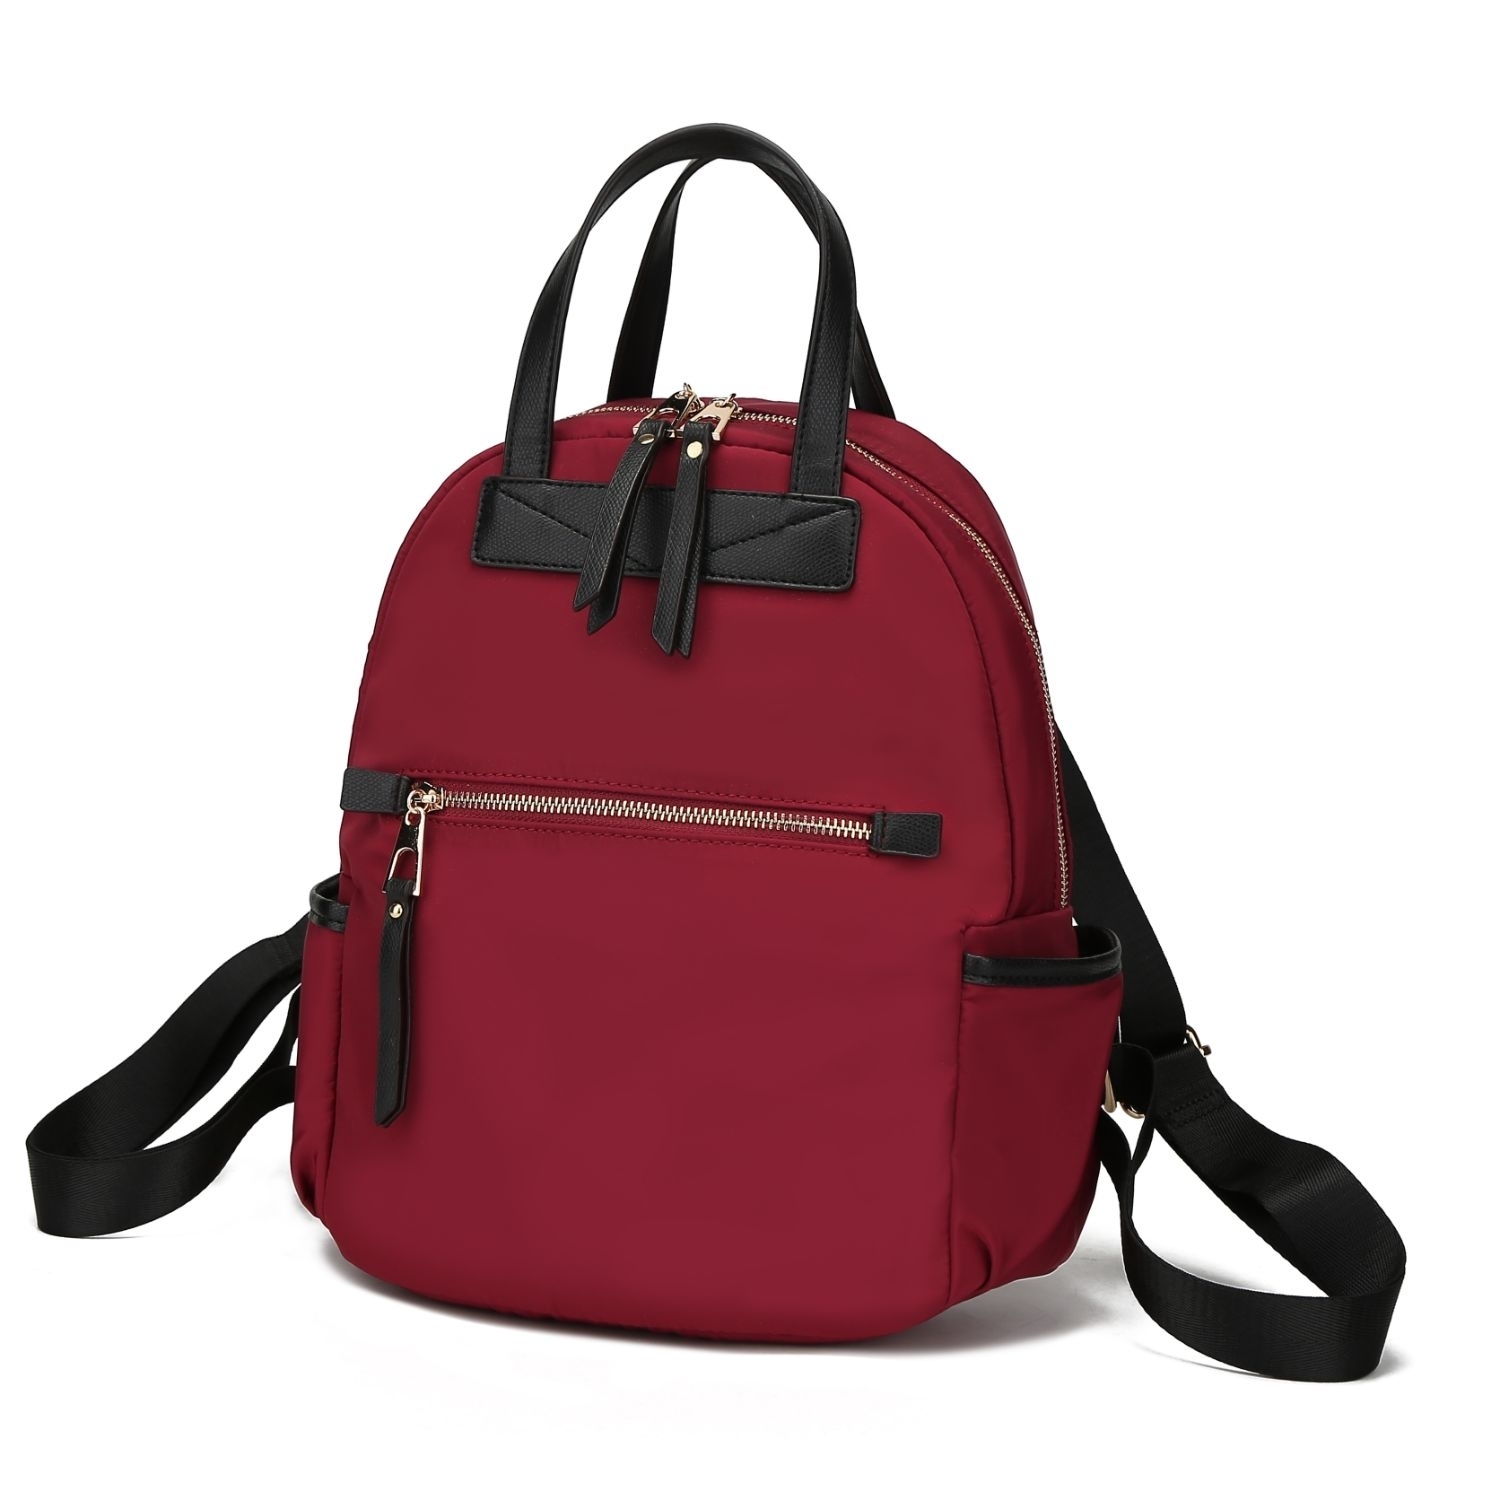 MKF Collection Greer Backpack For School Travel Work By Mia K. - Maroon